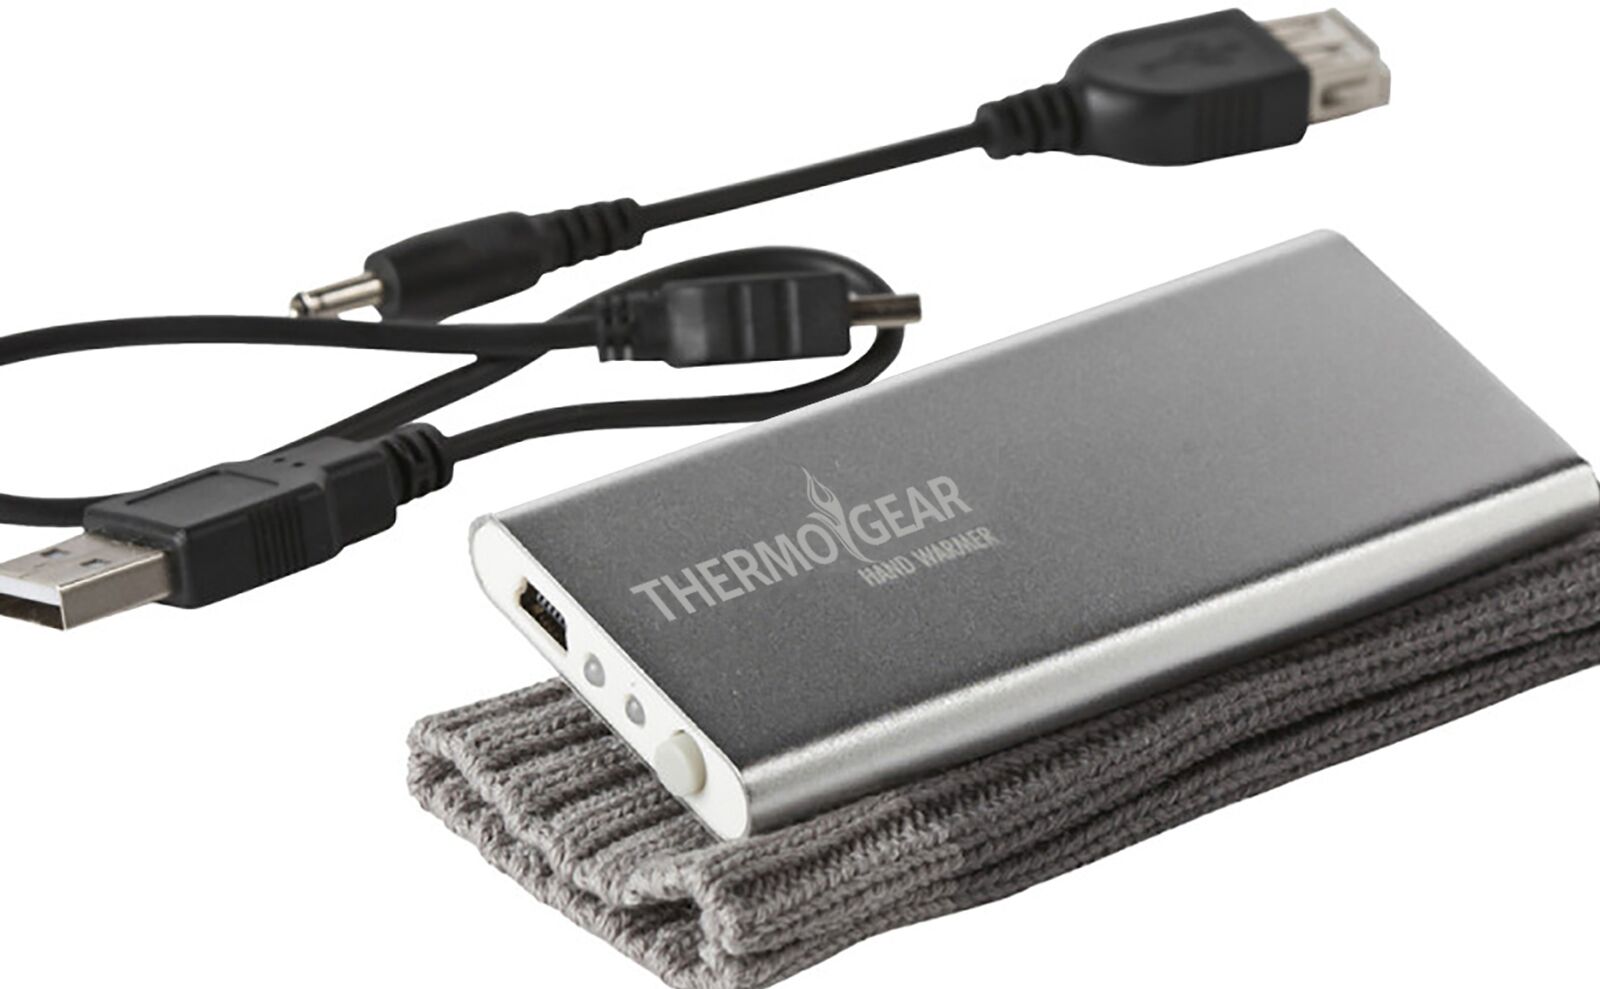 THERMO GEAR Slim Rechargeable Hand Warmer - image 2 of 4